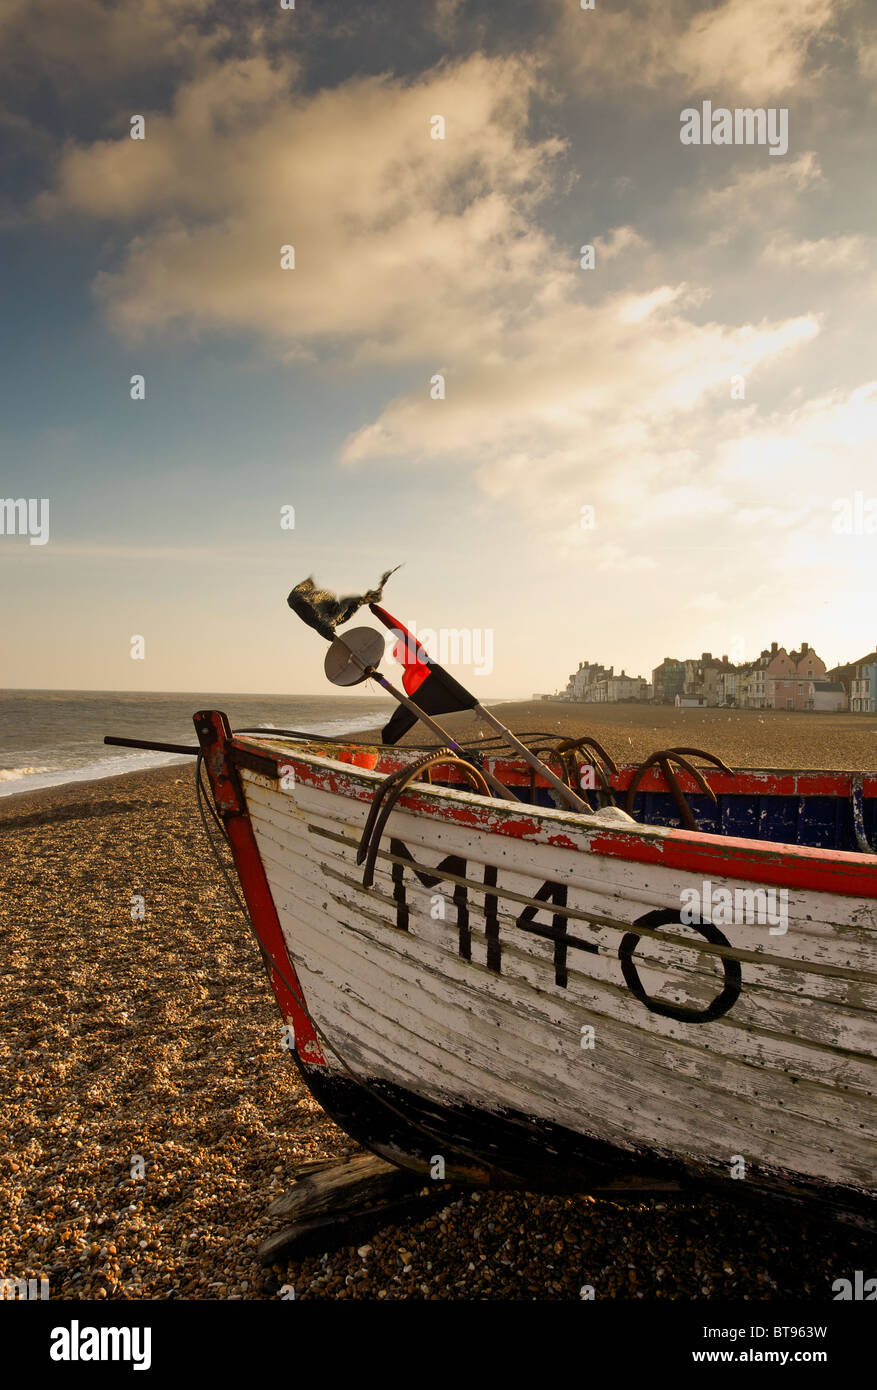 Aldeburgh town from the beach with a fishing boat in the foreground Stock Photo